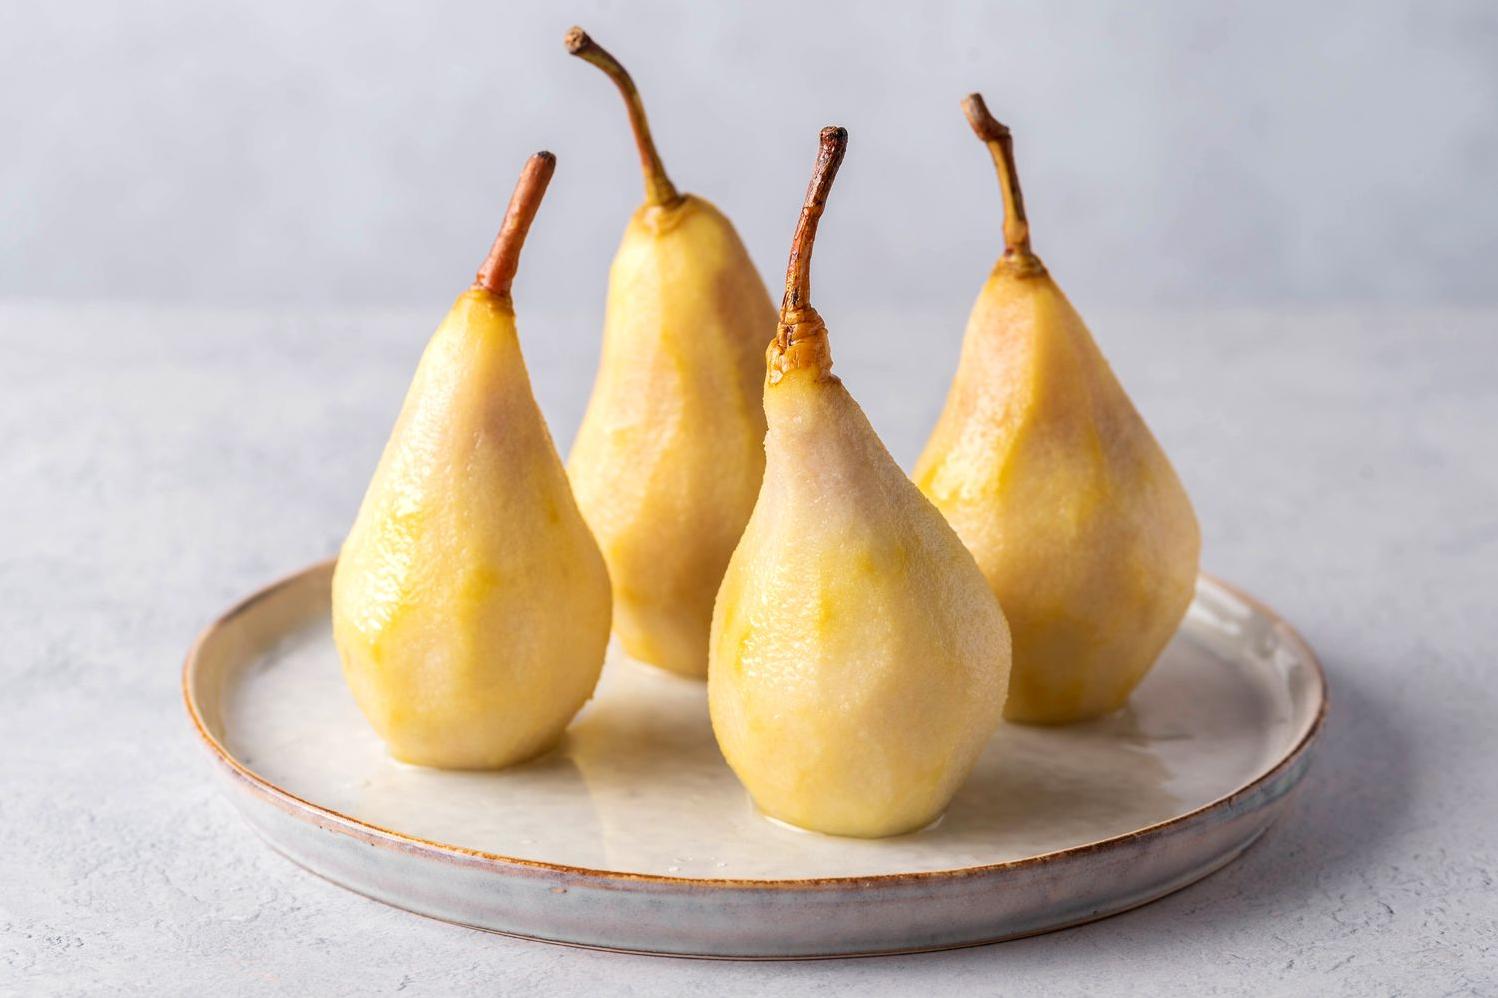  Sweet and succulent pears simmering in a white wine bath